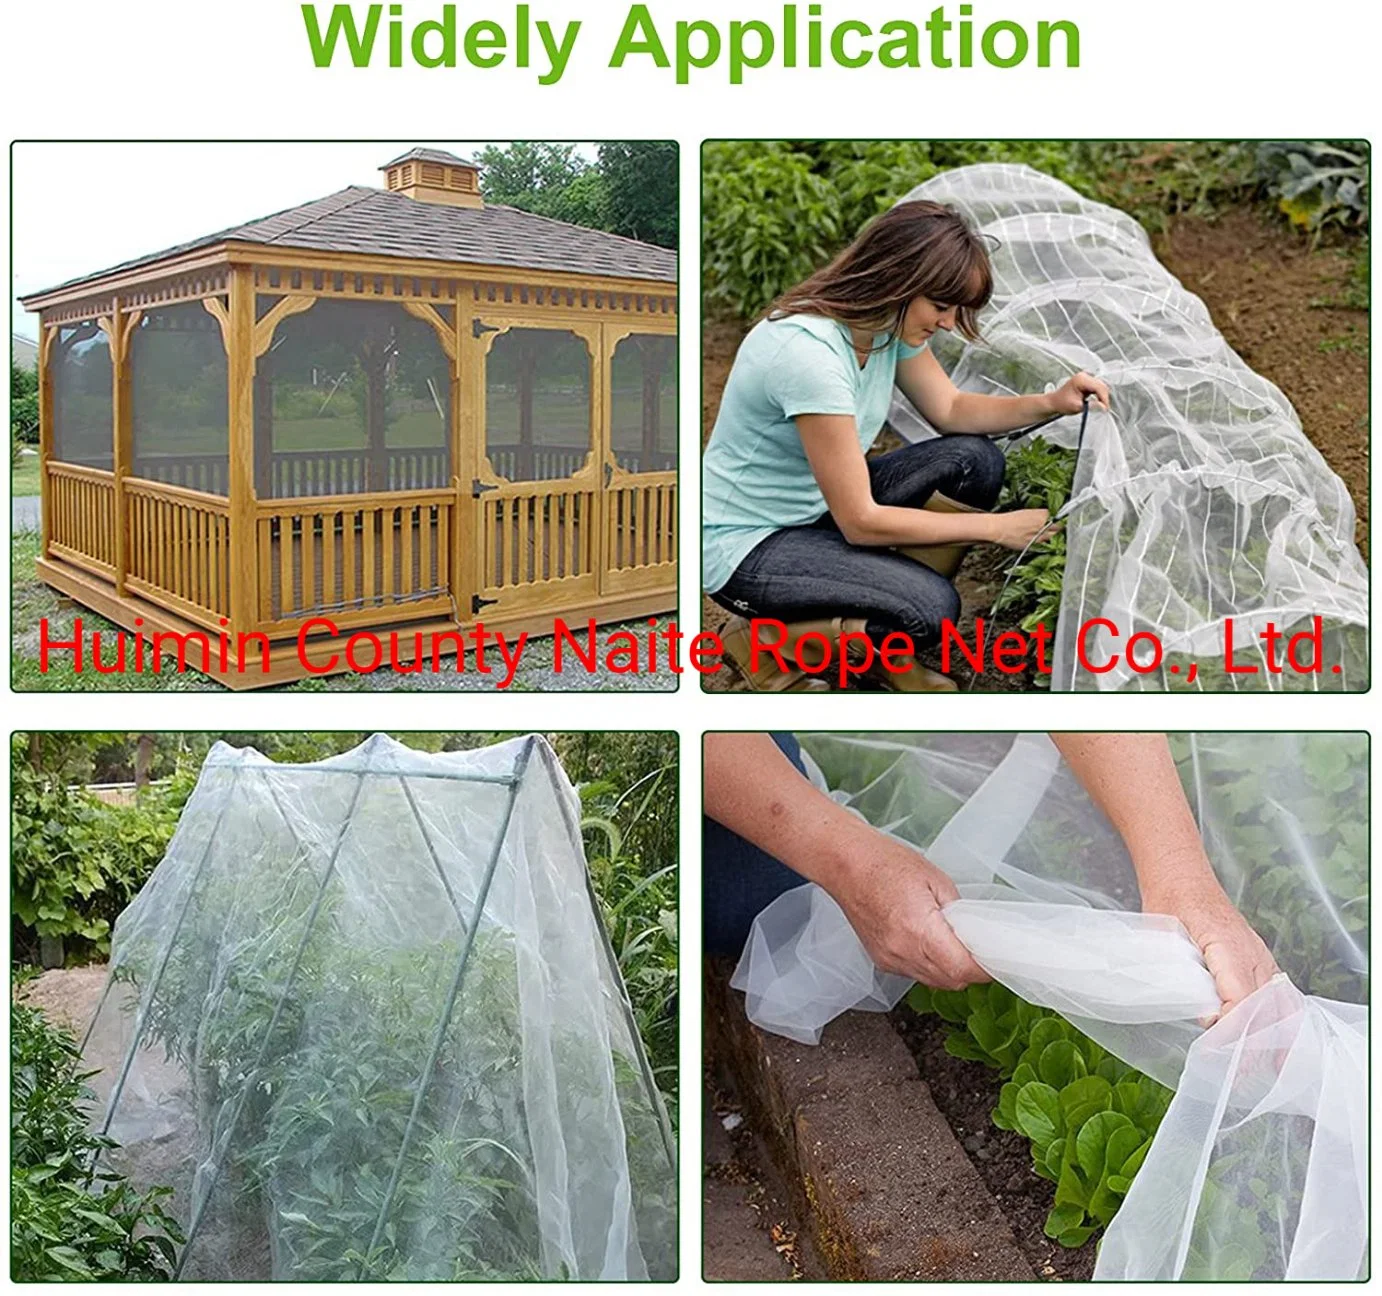 Insect Net Greenhouse Garden Nettings Fences Nets Fine Mesh Insect Mosquito Bird Net for Protecting Vegetables Flowers Fruits Trees Plants